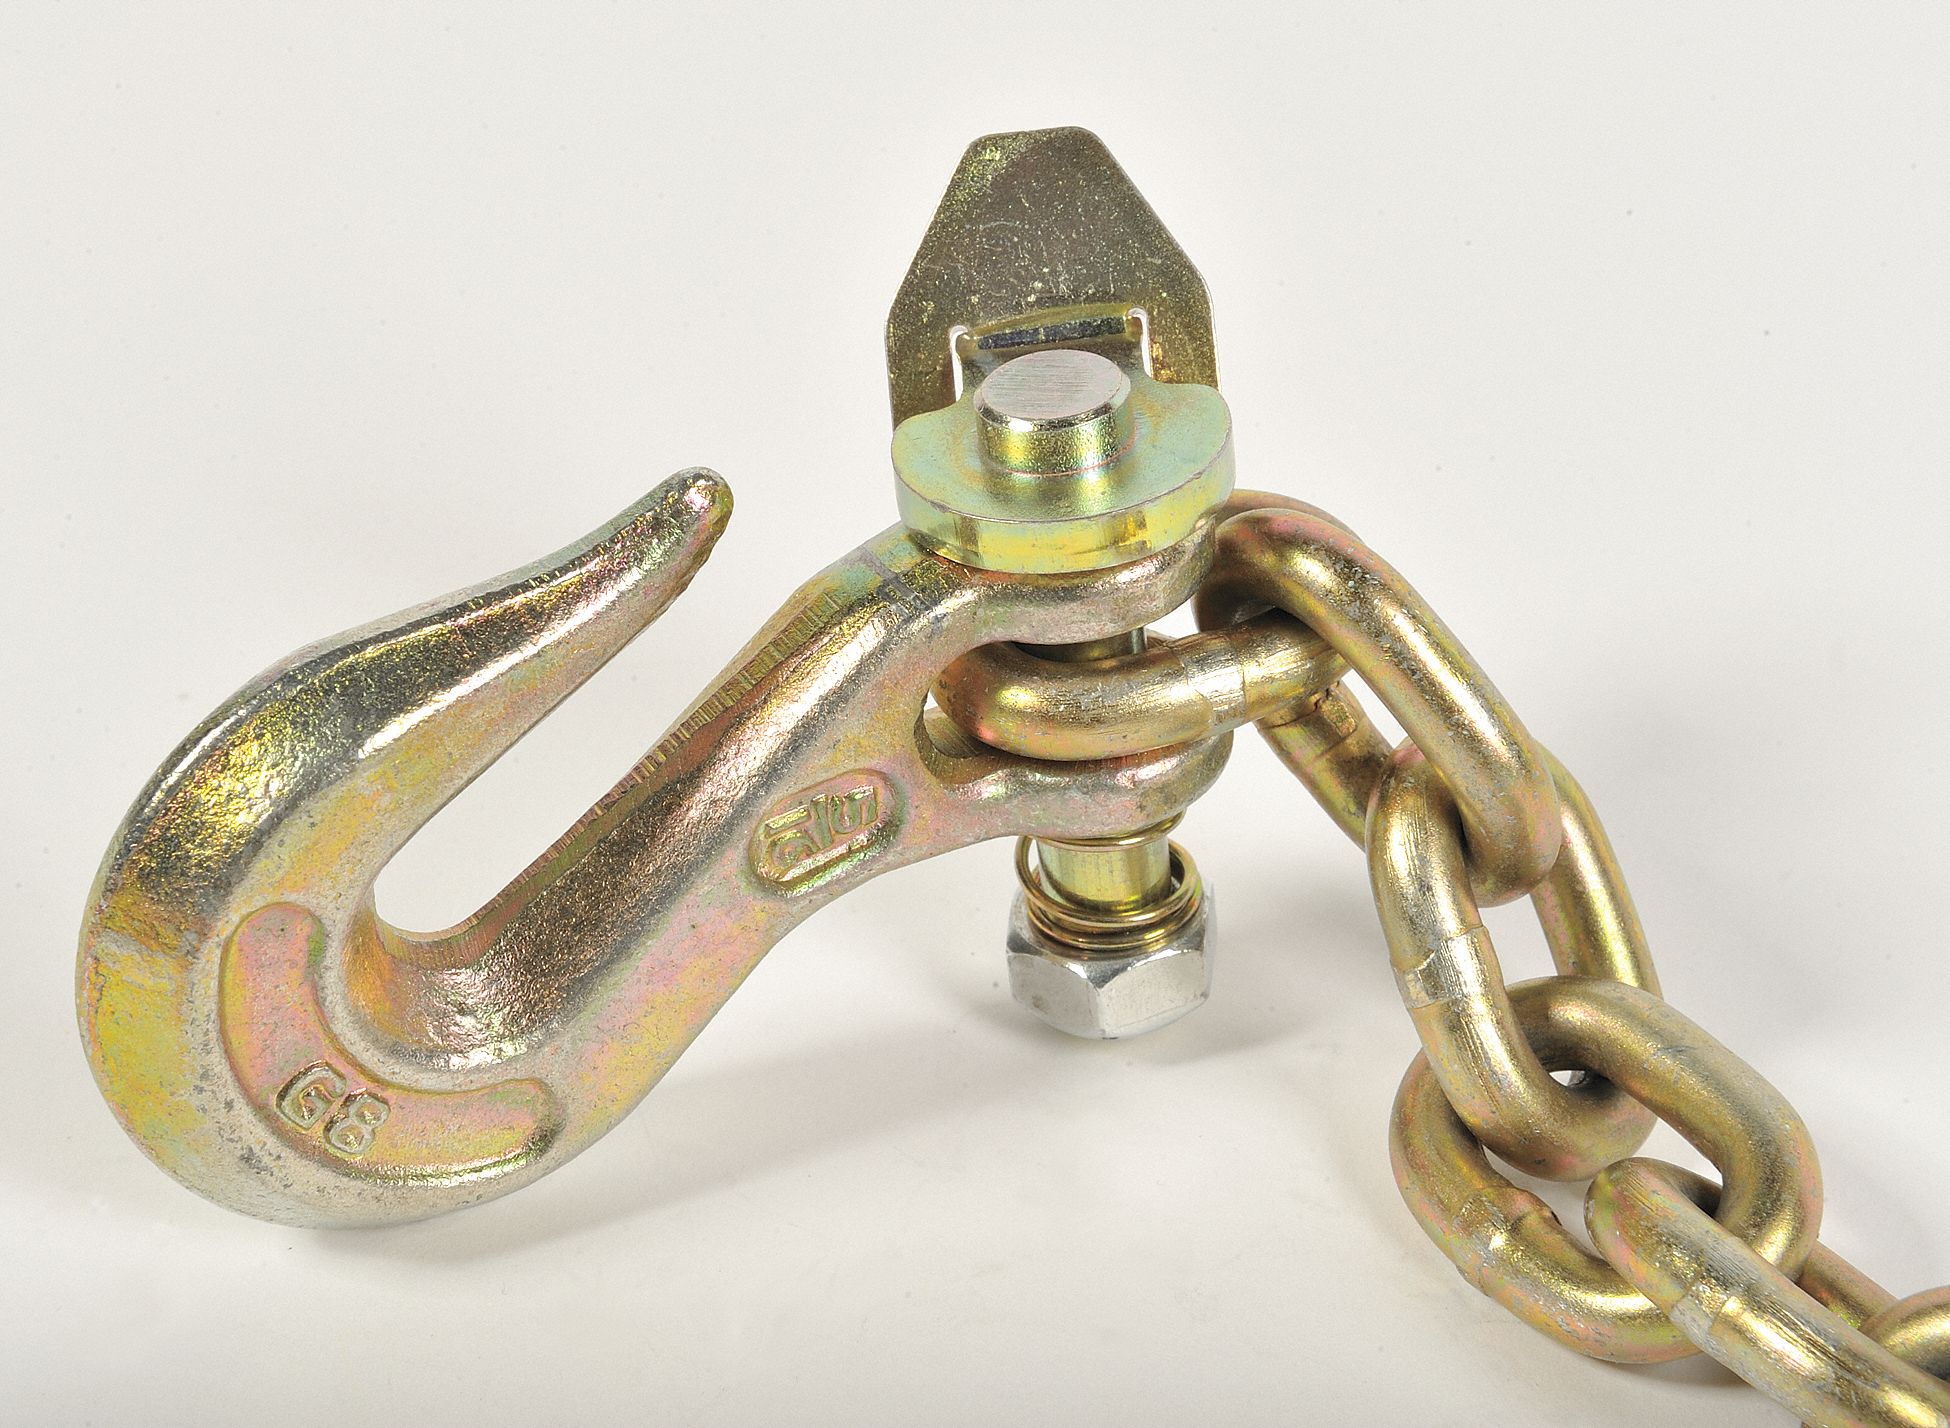 AutoHauler Supply 1/2 inch Grade 70 Alloy Steel Clevis Grab  Hookバネ式安全ロックラッチ付き 革新とスタイルの新次元 